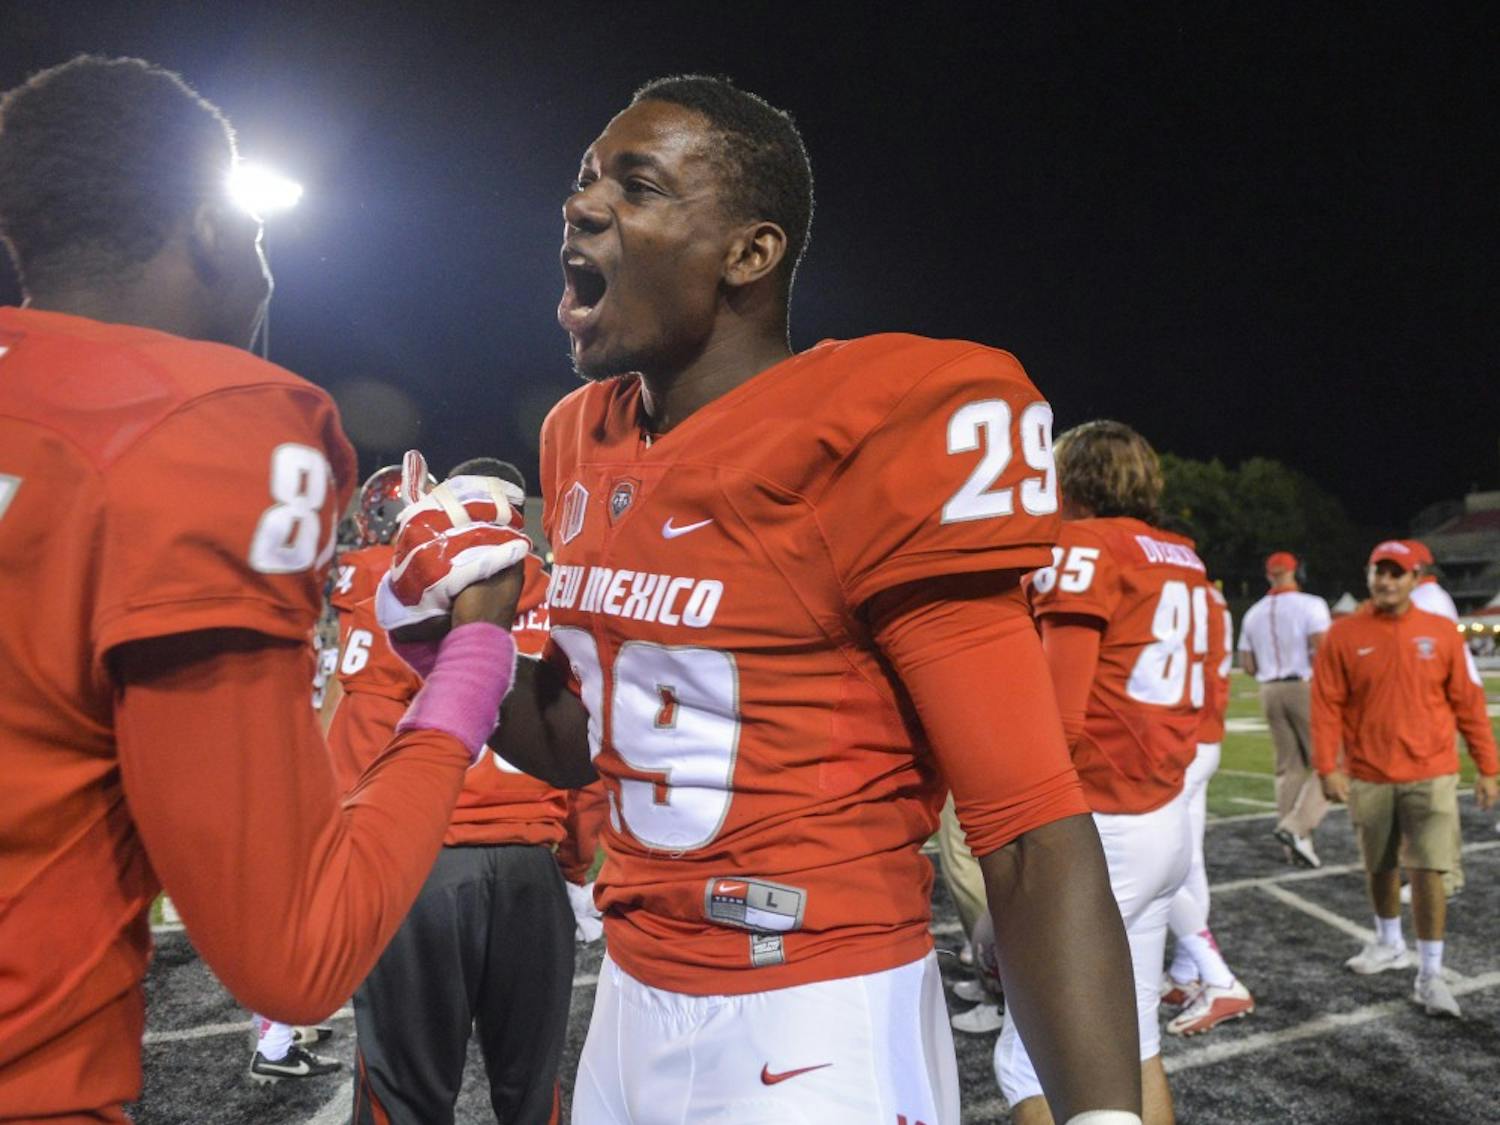 Redshirt junior linebacker Kenya Donaldson celebrates before the Lobos’ 28-27 victory against Hawaii University at University Stadium on Oct. 17. The Lobos are a mere three wins away from going to the Mountain West Championship game.